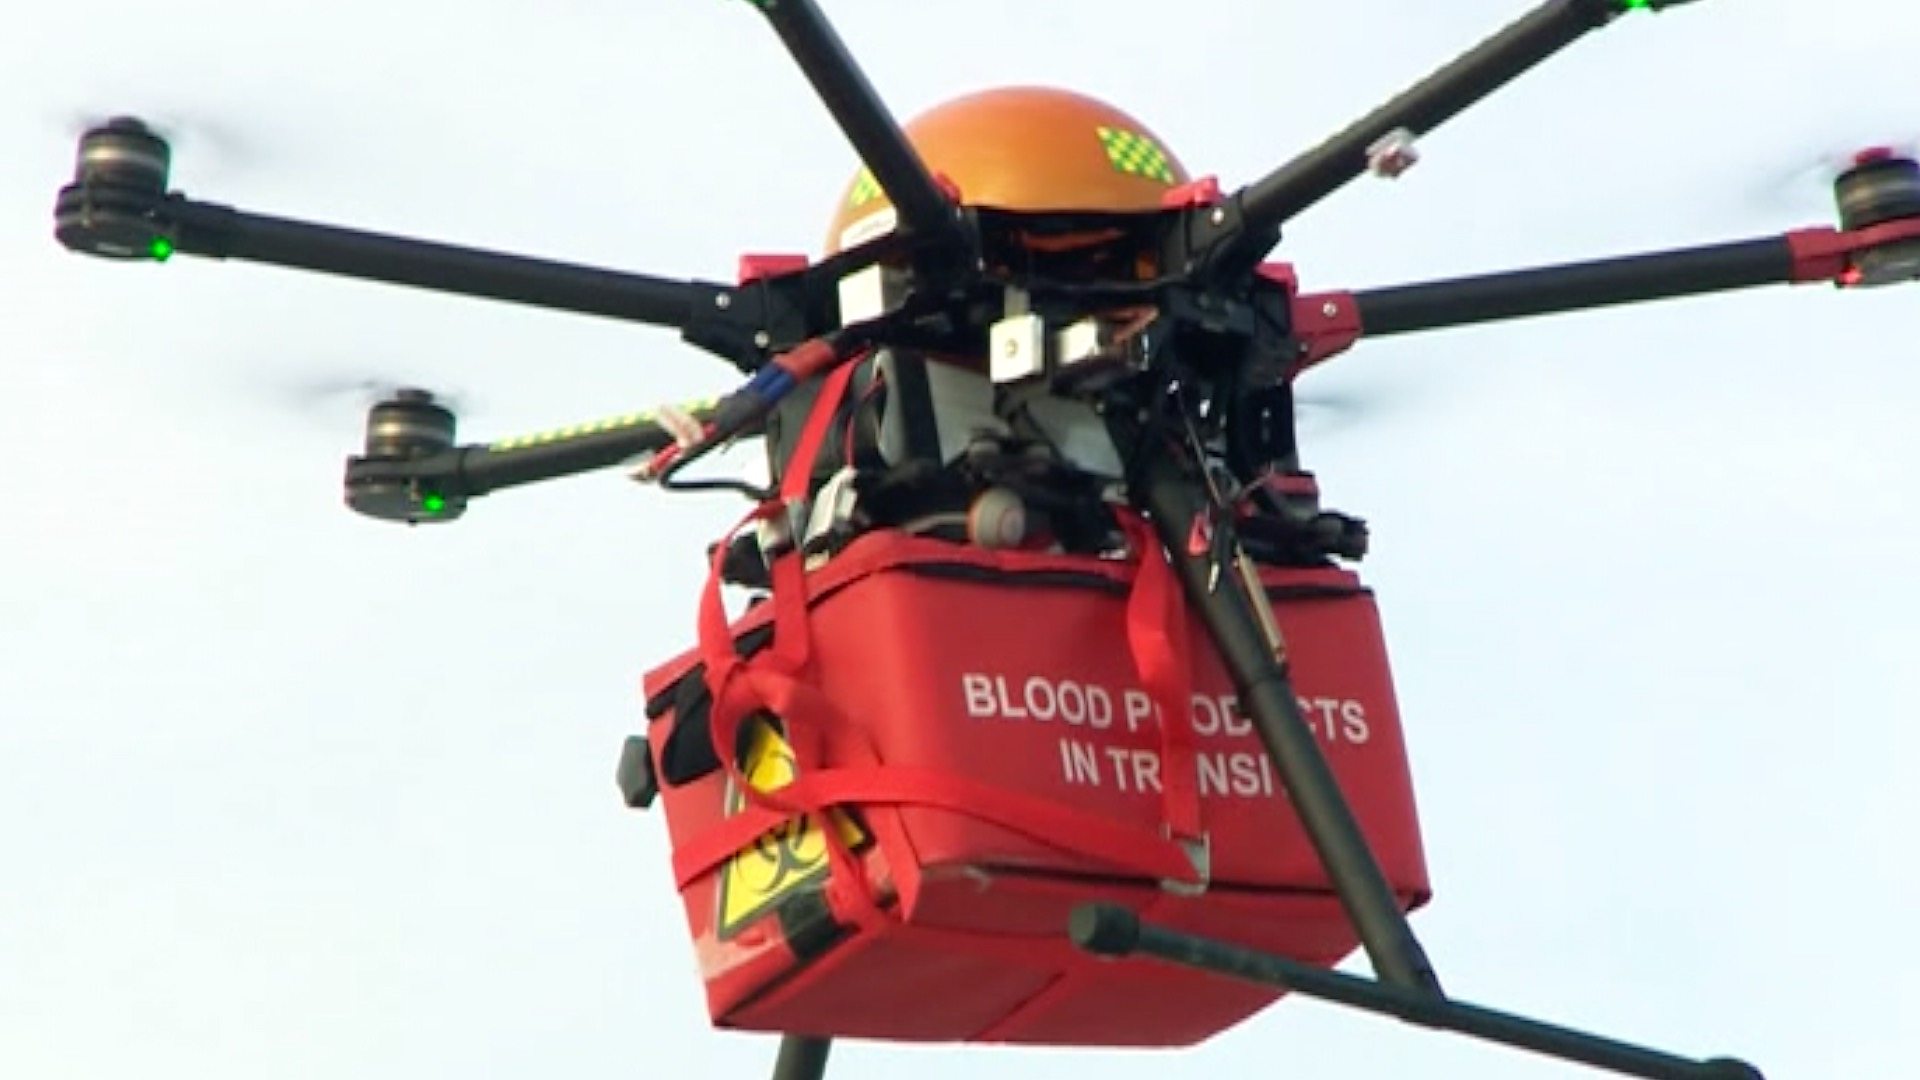 Drones: Could they be used deliver blood? - BBC News